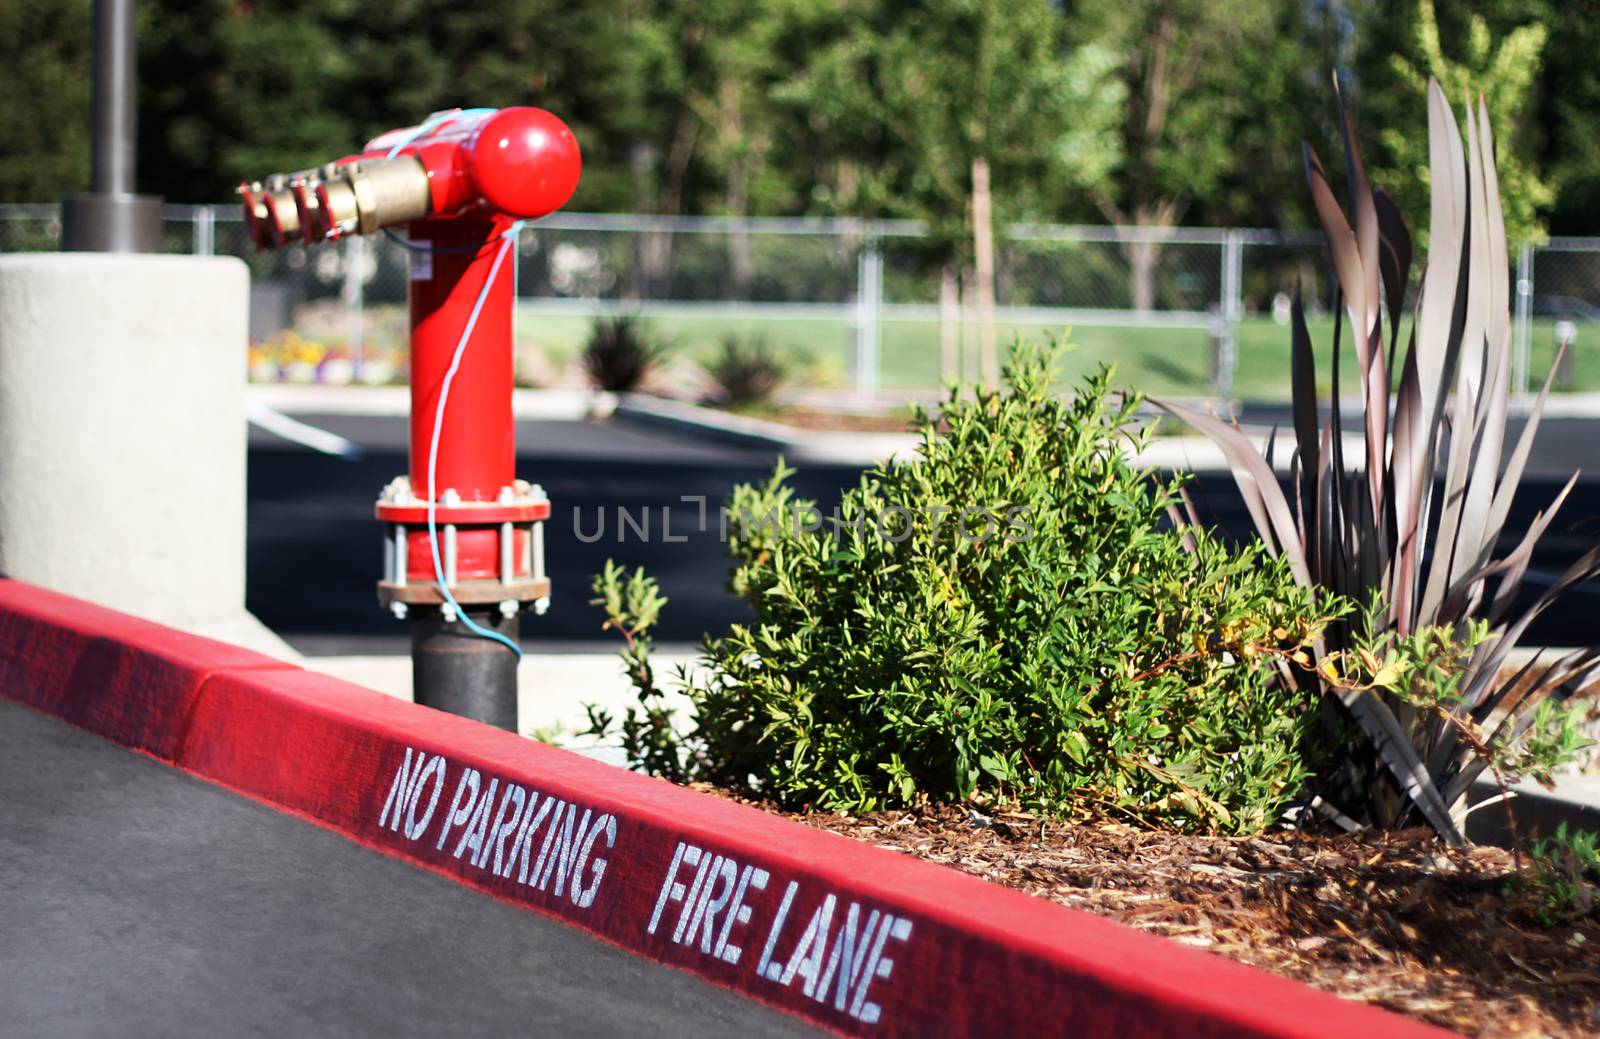 "No Parking Fire Lane" sign on the parking lot, with a fire hydrant on the background.